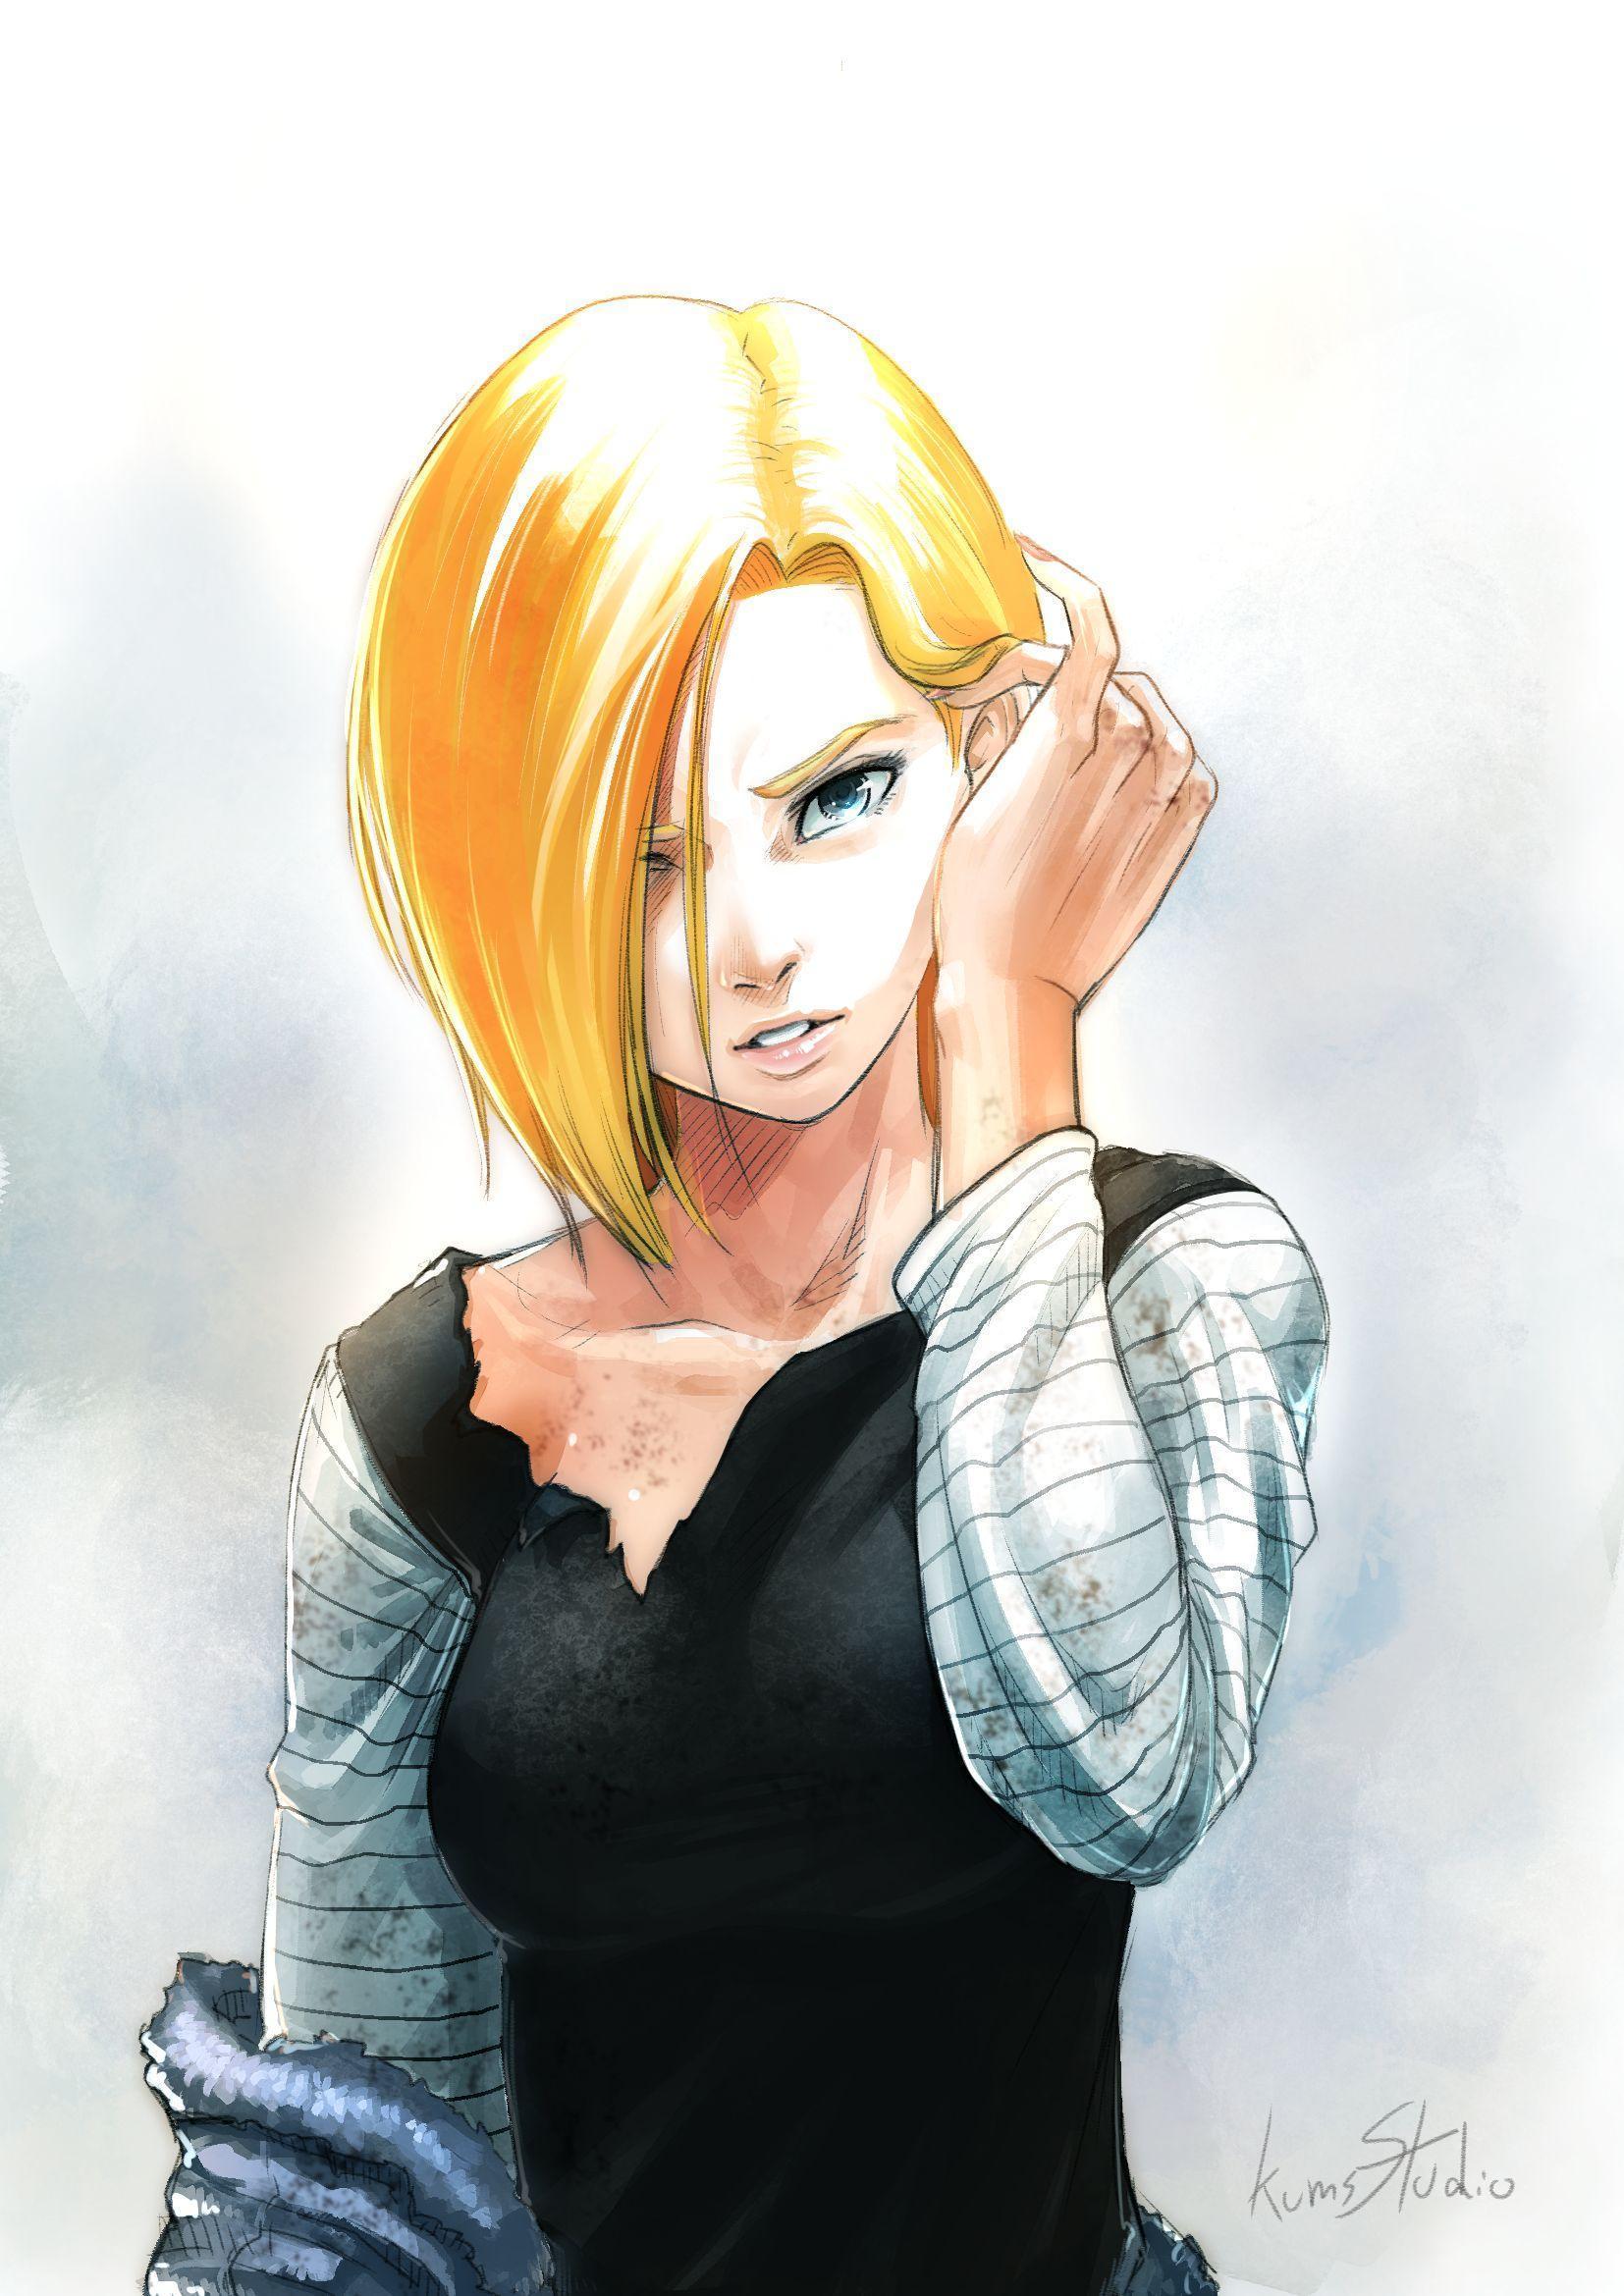 Android 18 Wallpapers - Wallpaper Cave